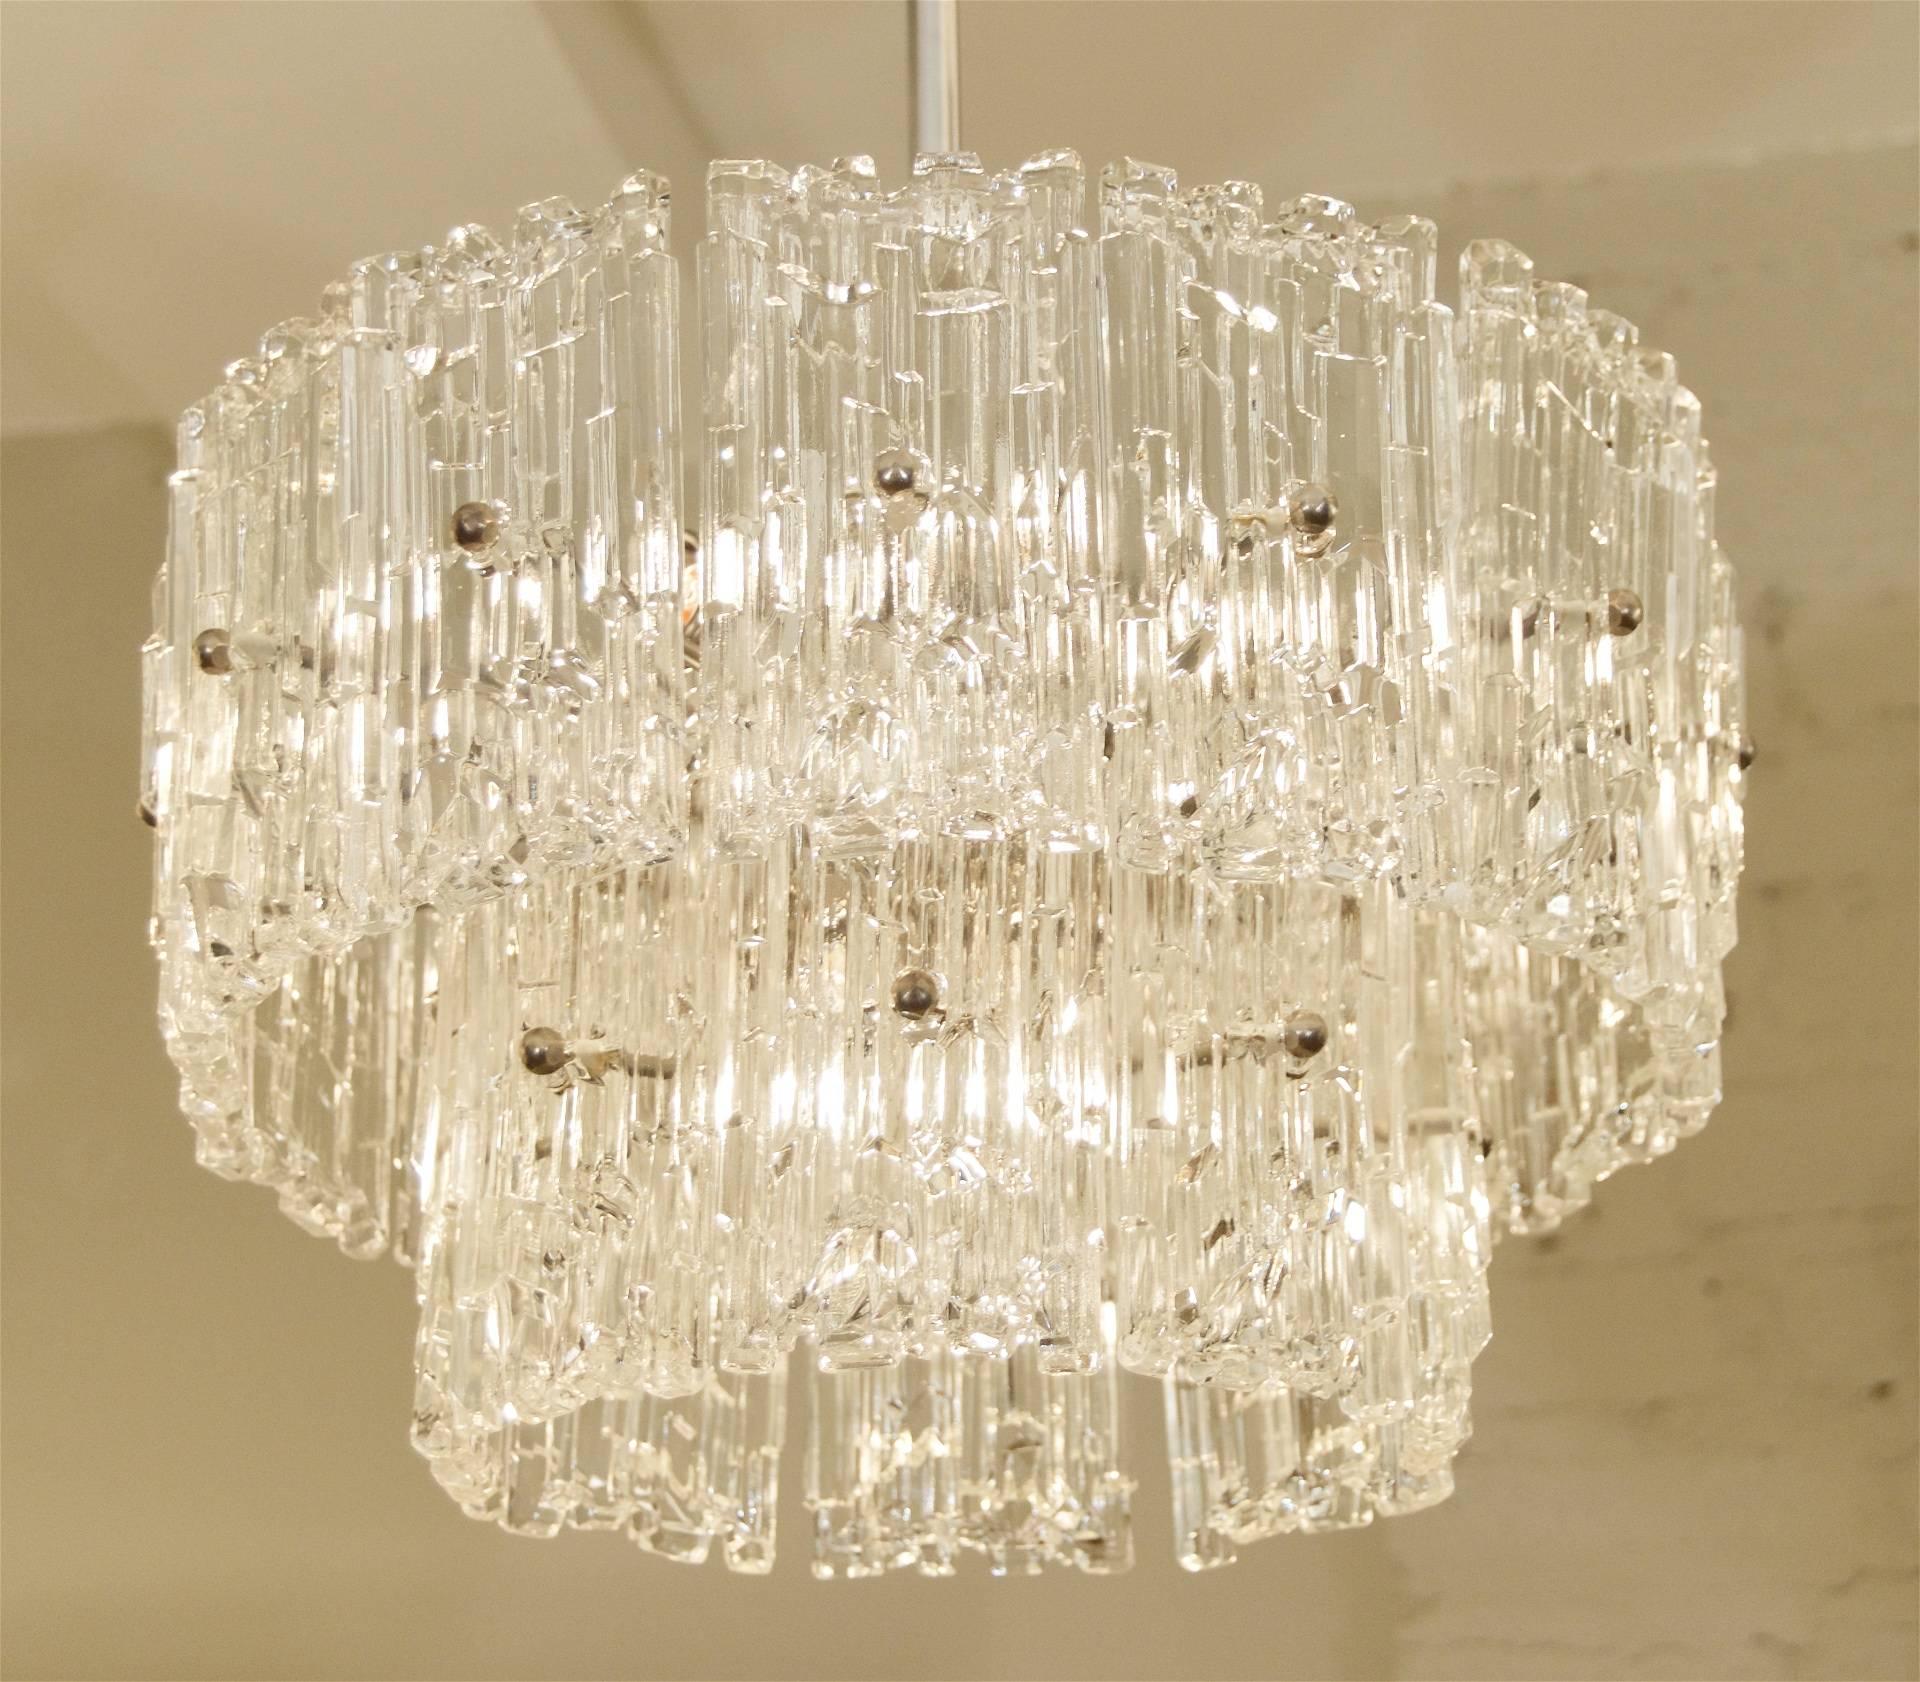 Two-tiered chandelier by Hillebrand with rectangular faceted glass.

Takes six E14 based bulbs up to 40 watts per bulb and one medium base downlight up to 60 watts. New wiring.

Height listed is of chandelier body only, current height as hung is